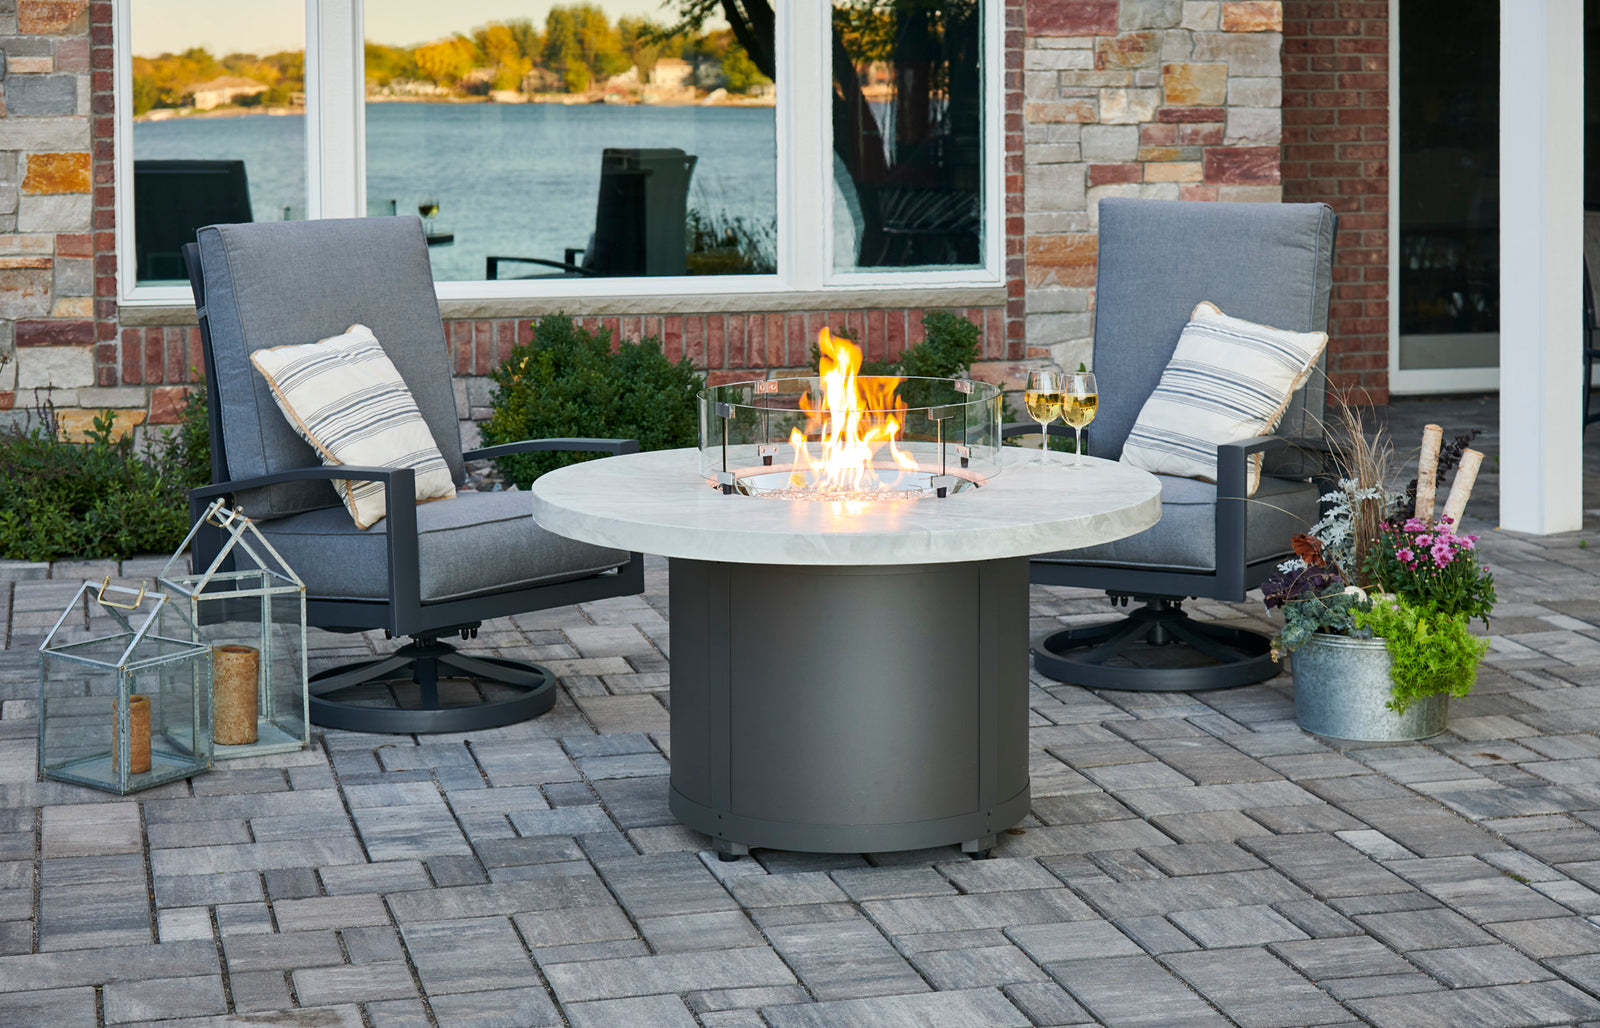 A Beacon Round Gas Fire Pit table from The Outdoor GreatRoom Company.